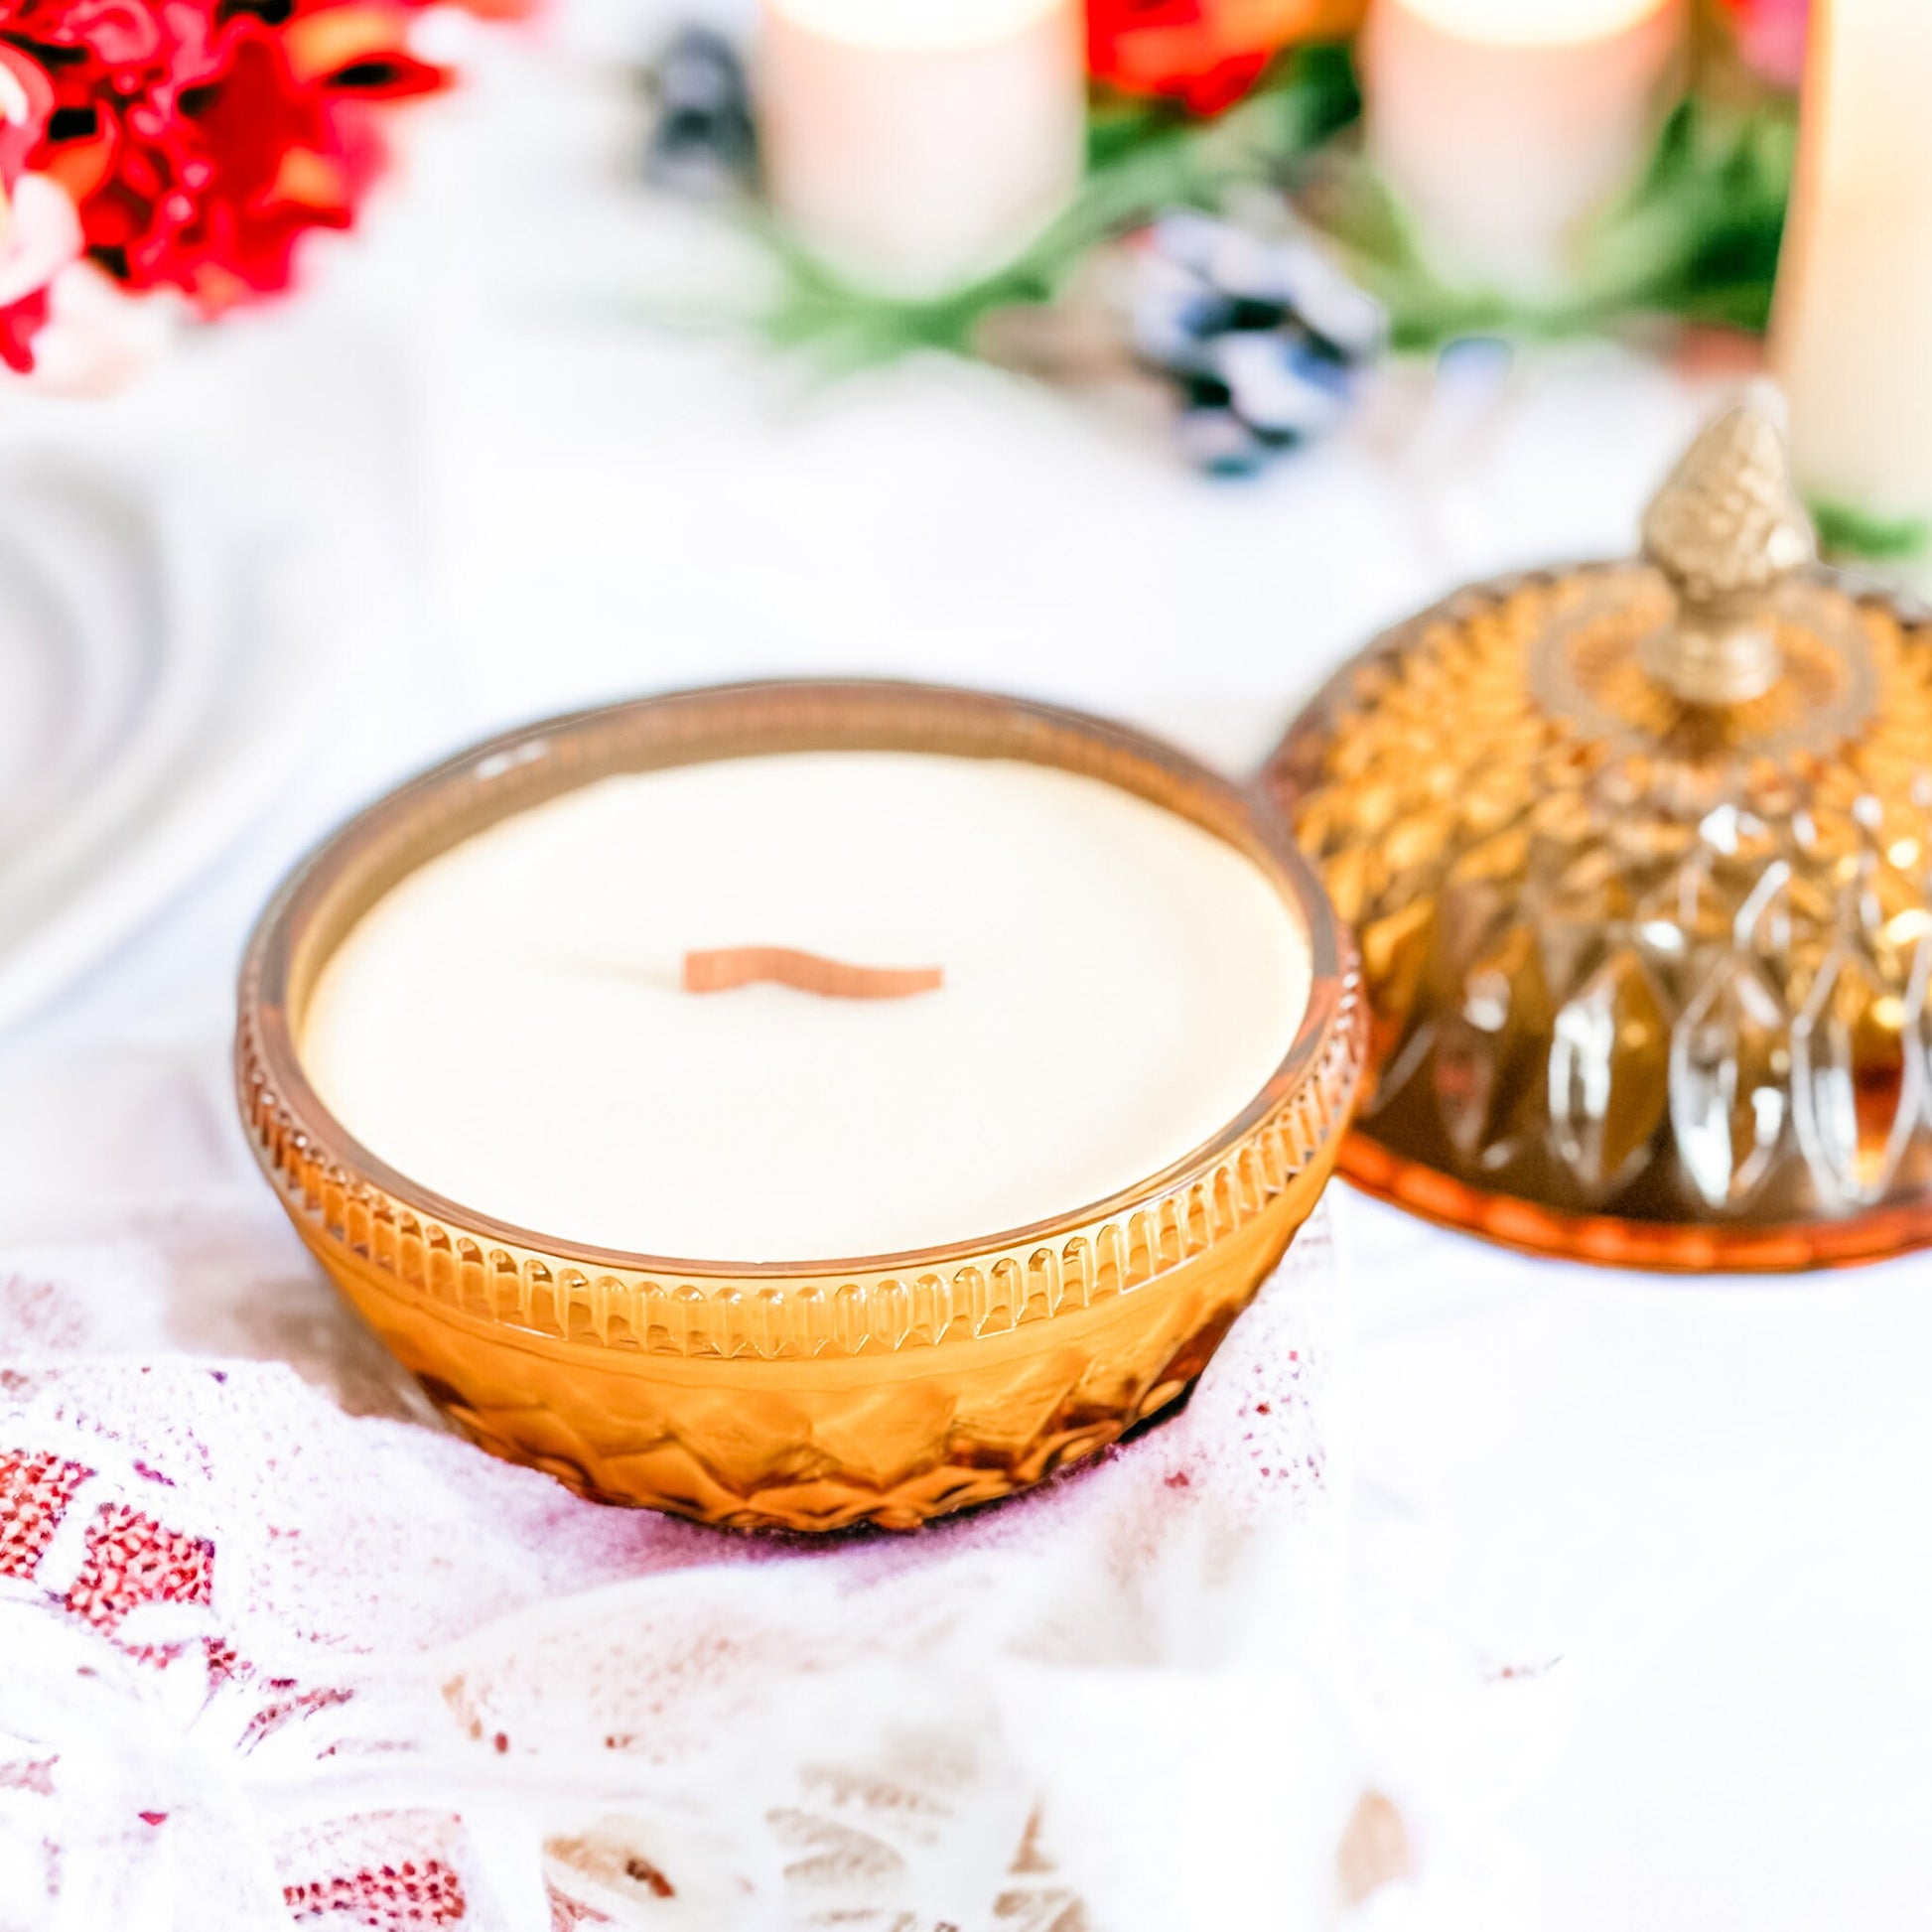 Pumpkin Spice Soy Candle in Vintage Pumpkin Candy Dish